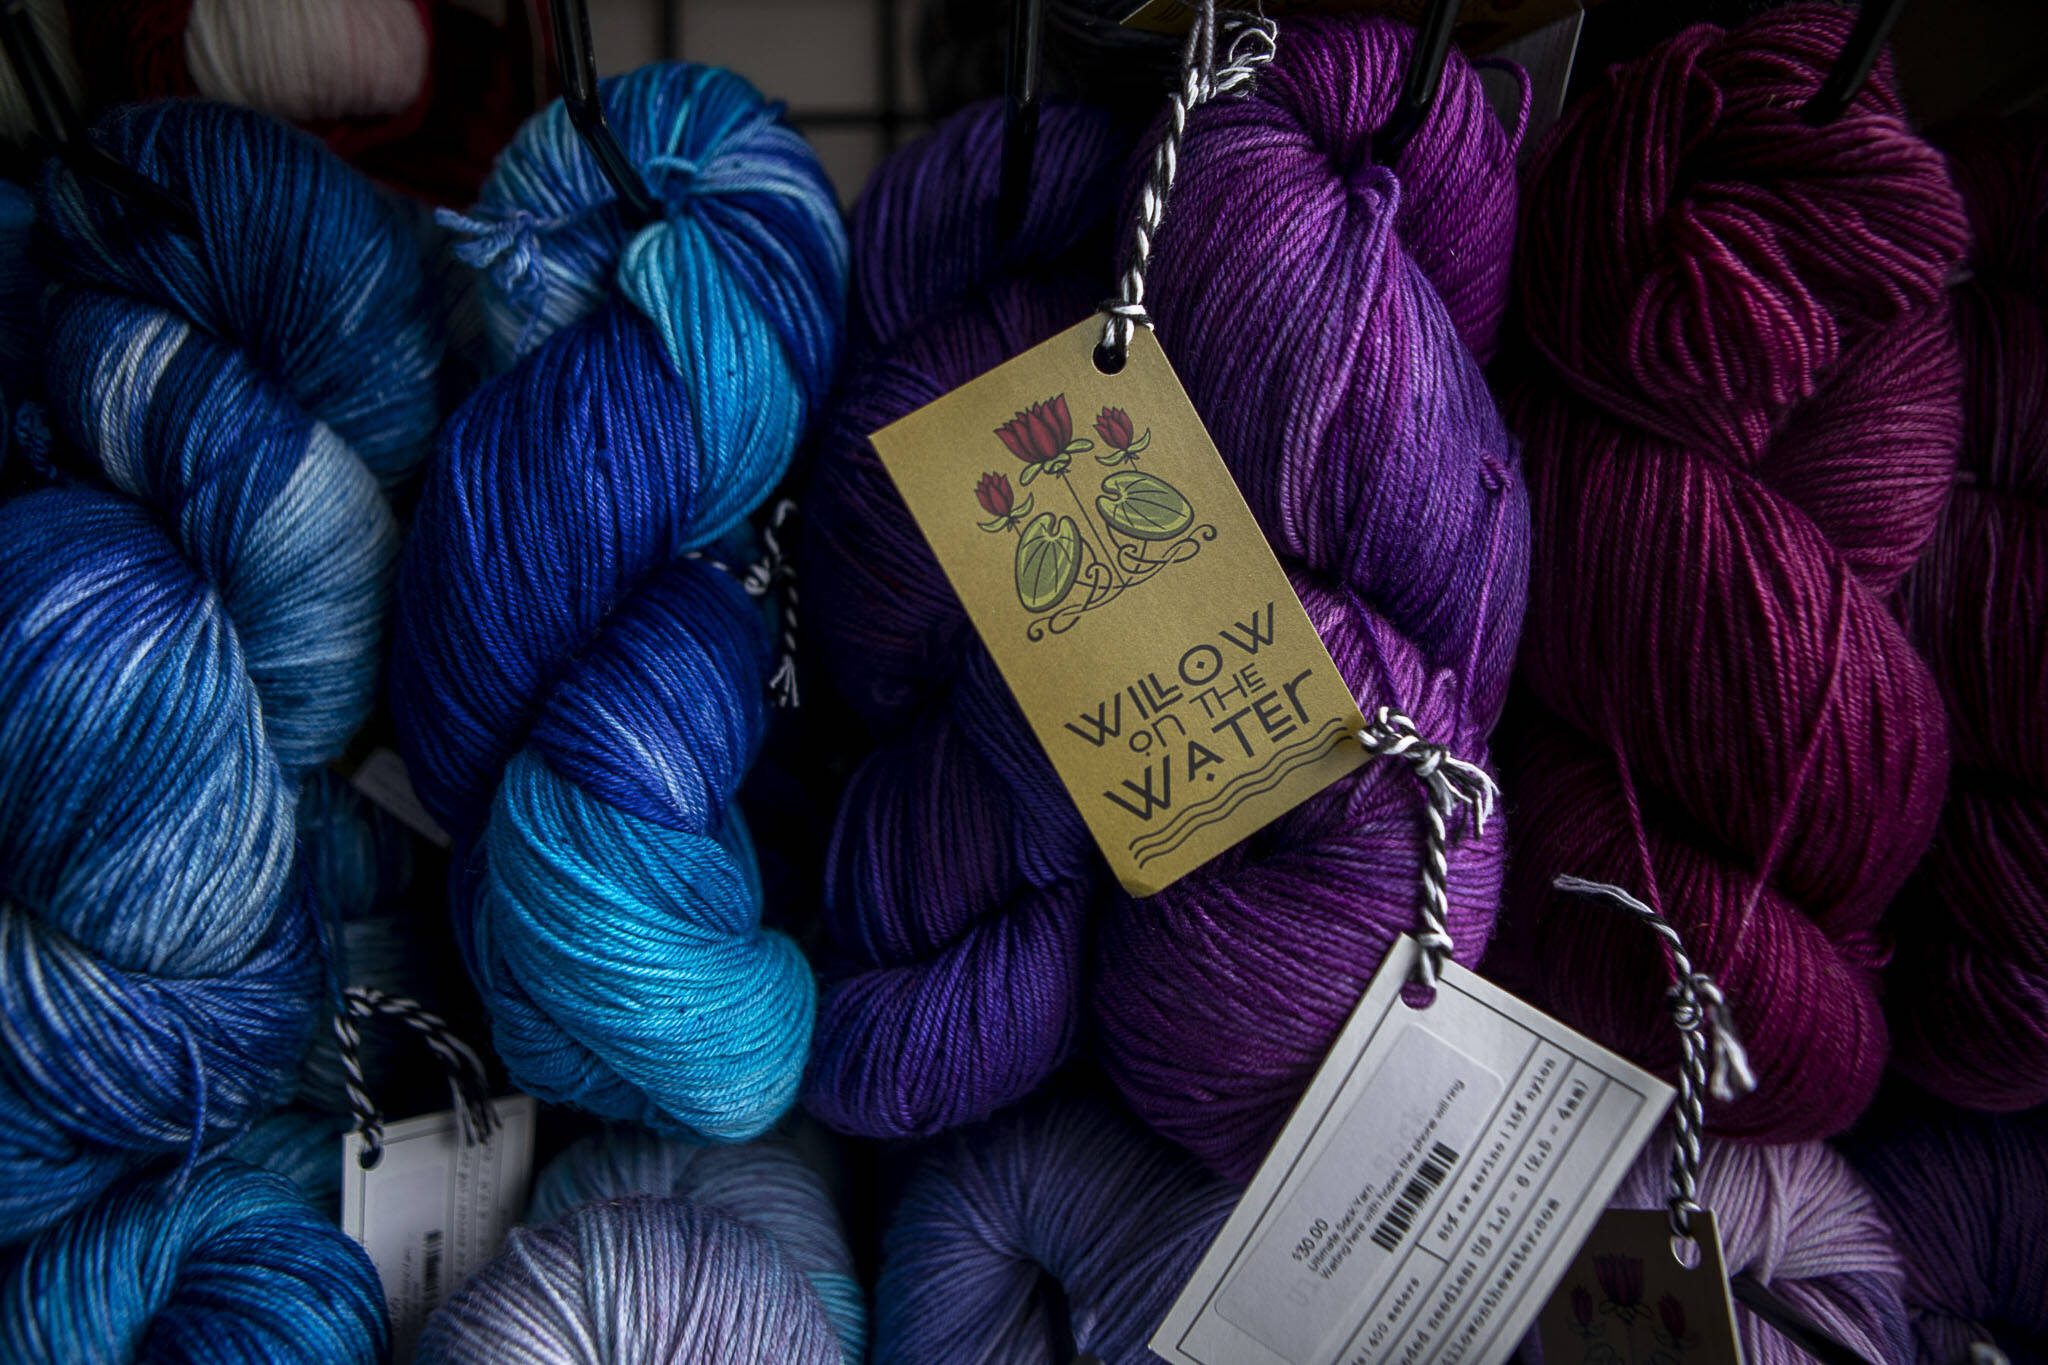 Yarn dyed by Willow Mietus, 50, hangs inside “The Wool Wagon.”